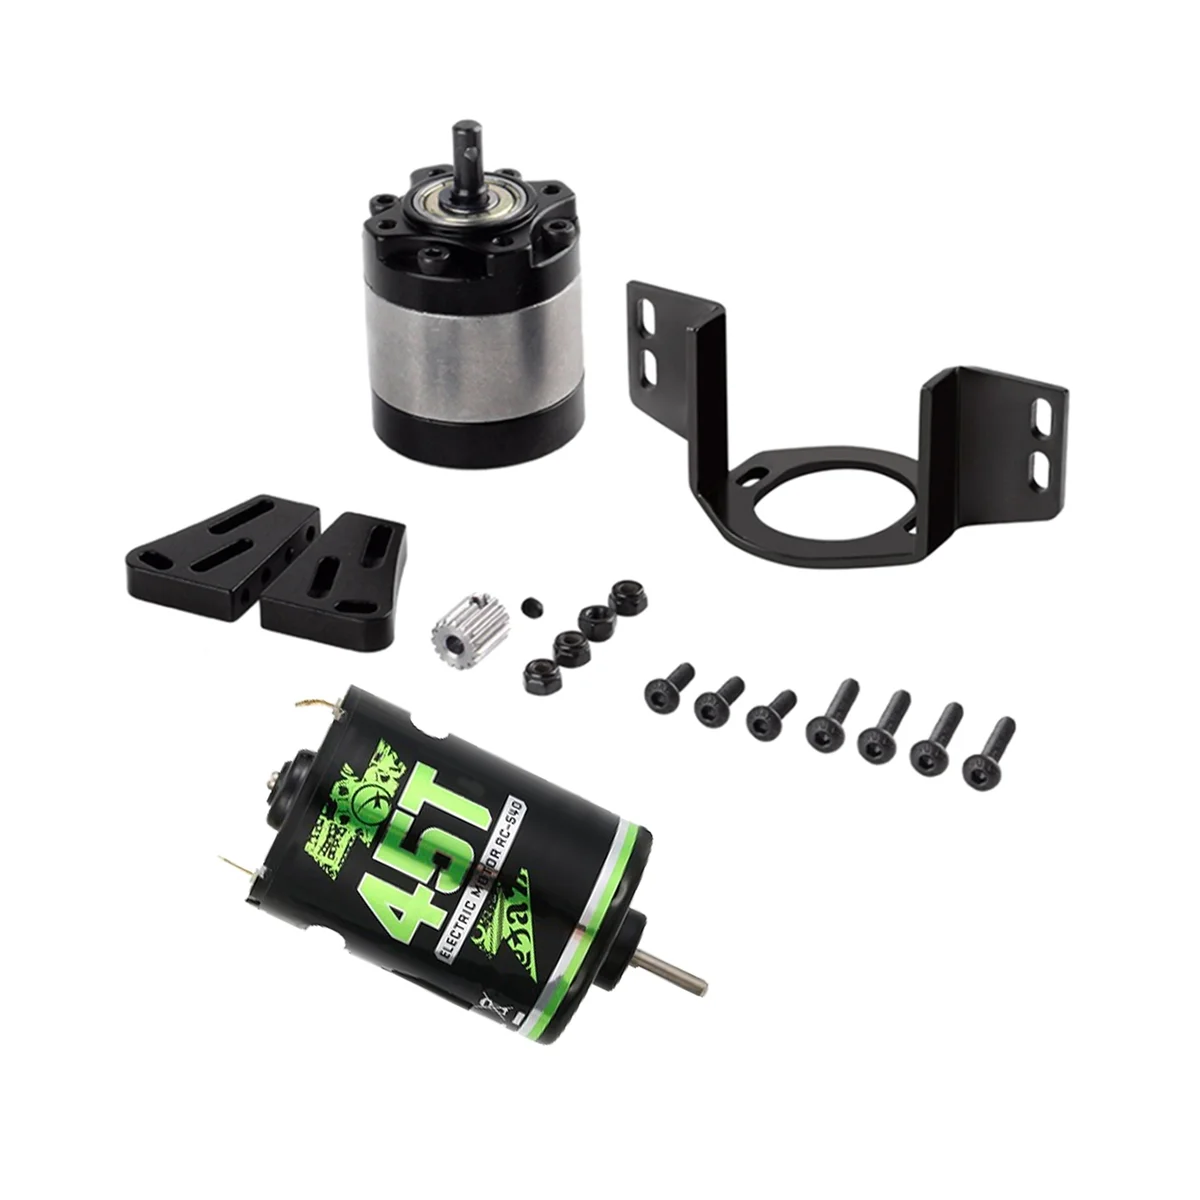 

540 Brushed Motor 45T with 1:5 Reduction Gearbox for 1/14 Trailer 1/10 RC Car Crawler Axial SCX10 Traxxas TRX4